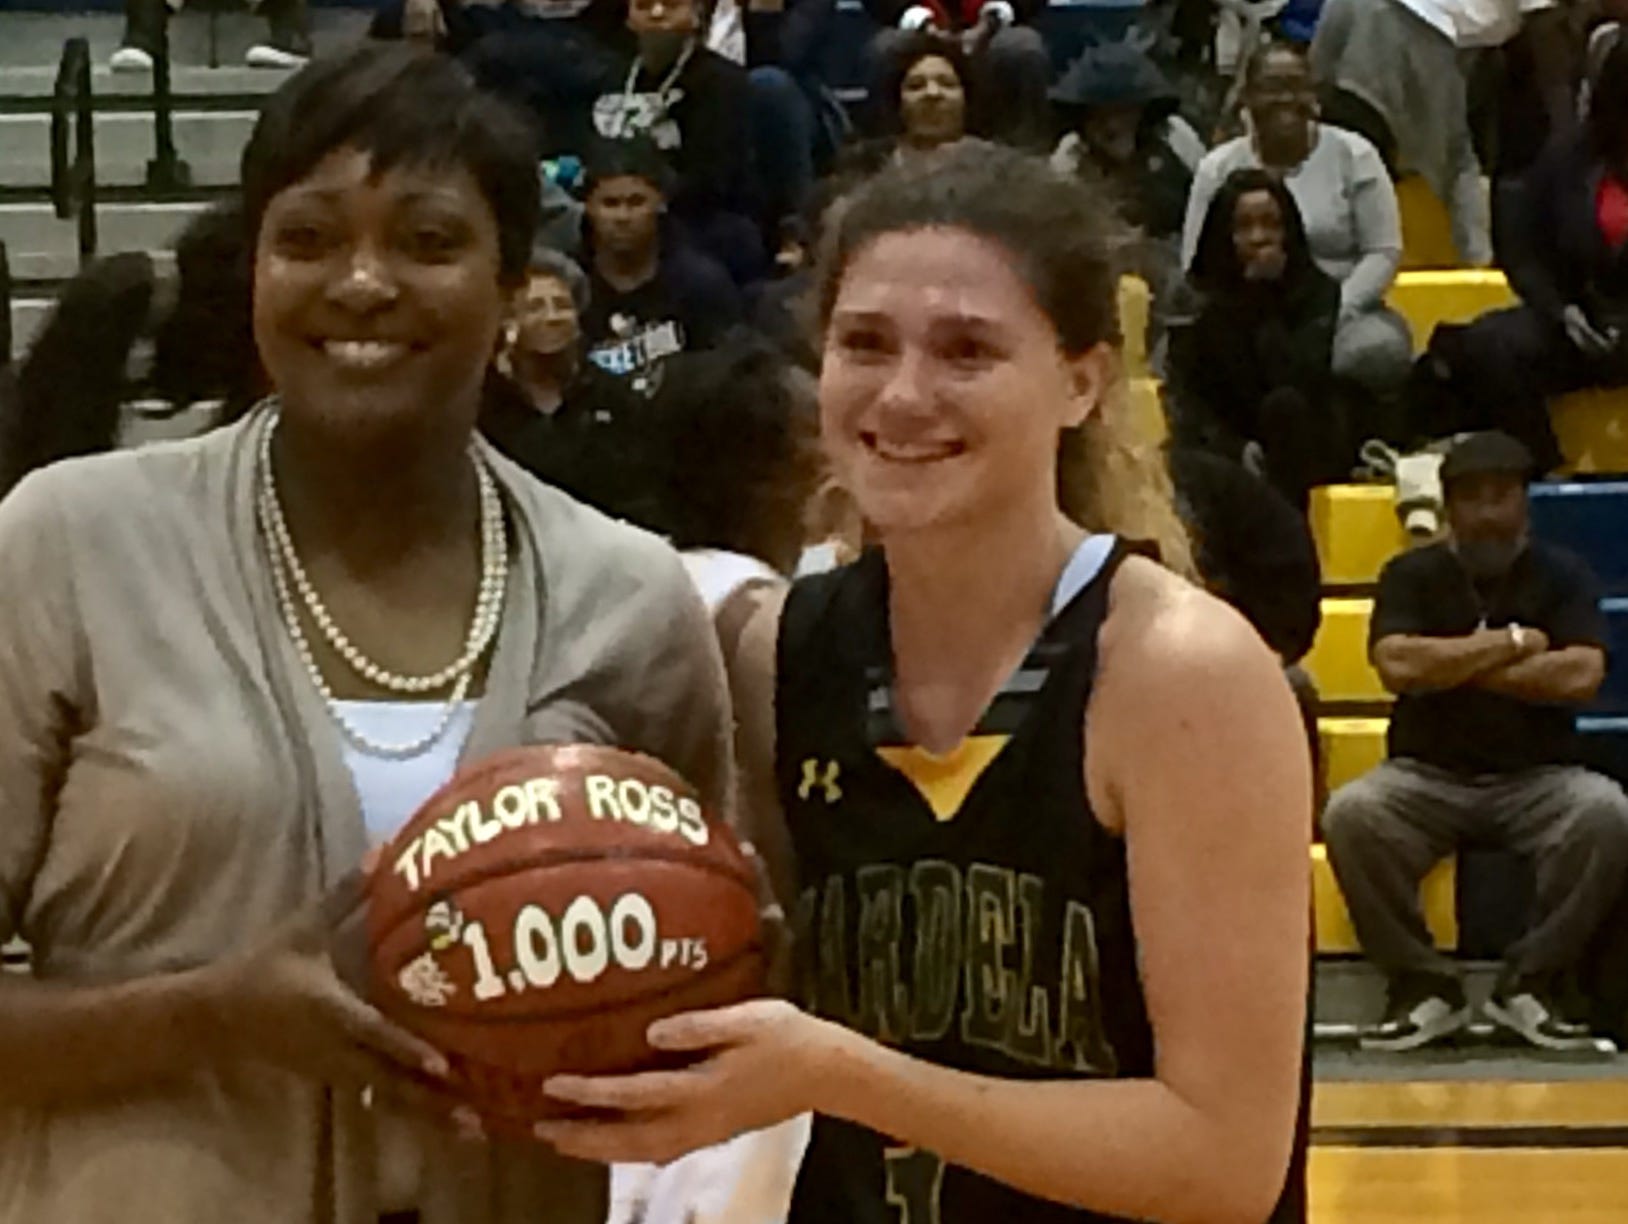 Mardela head coach Kesha Cook presents Taylor Ross with a commemorative ball after she scored her 1,000th point.